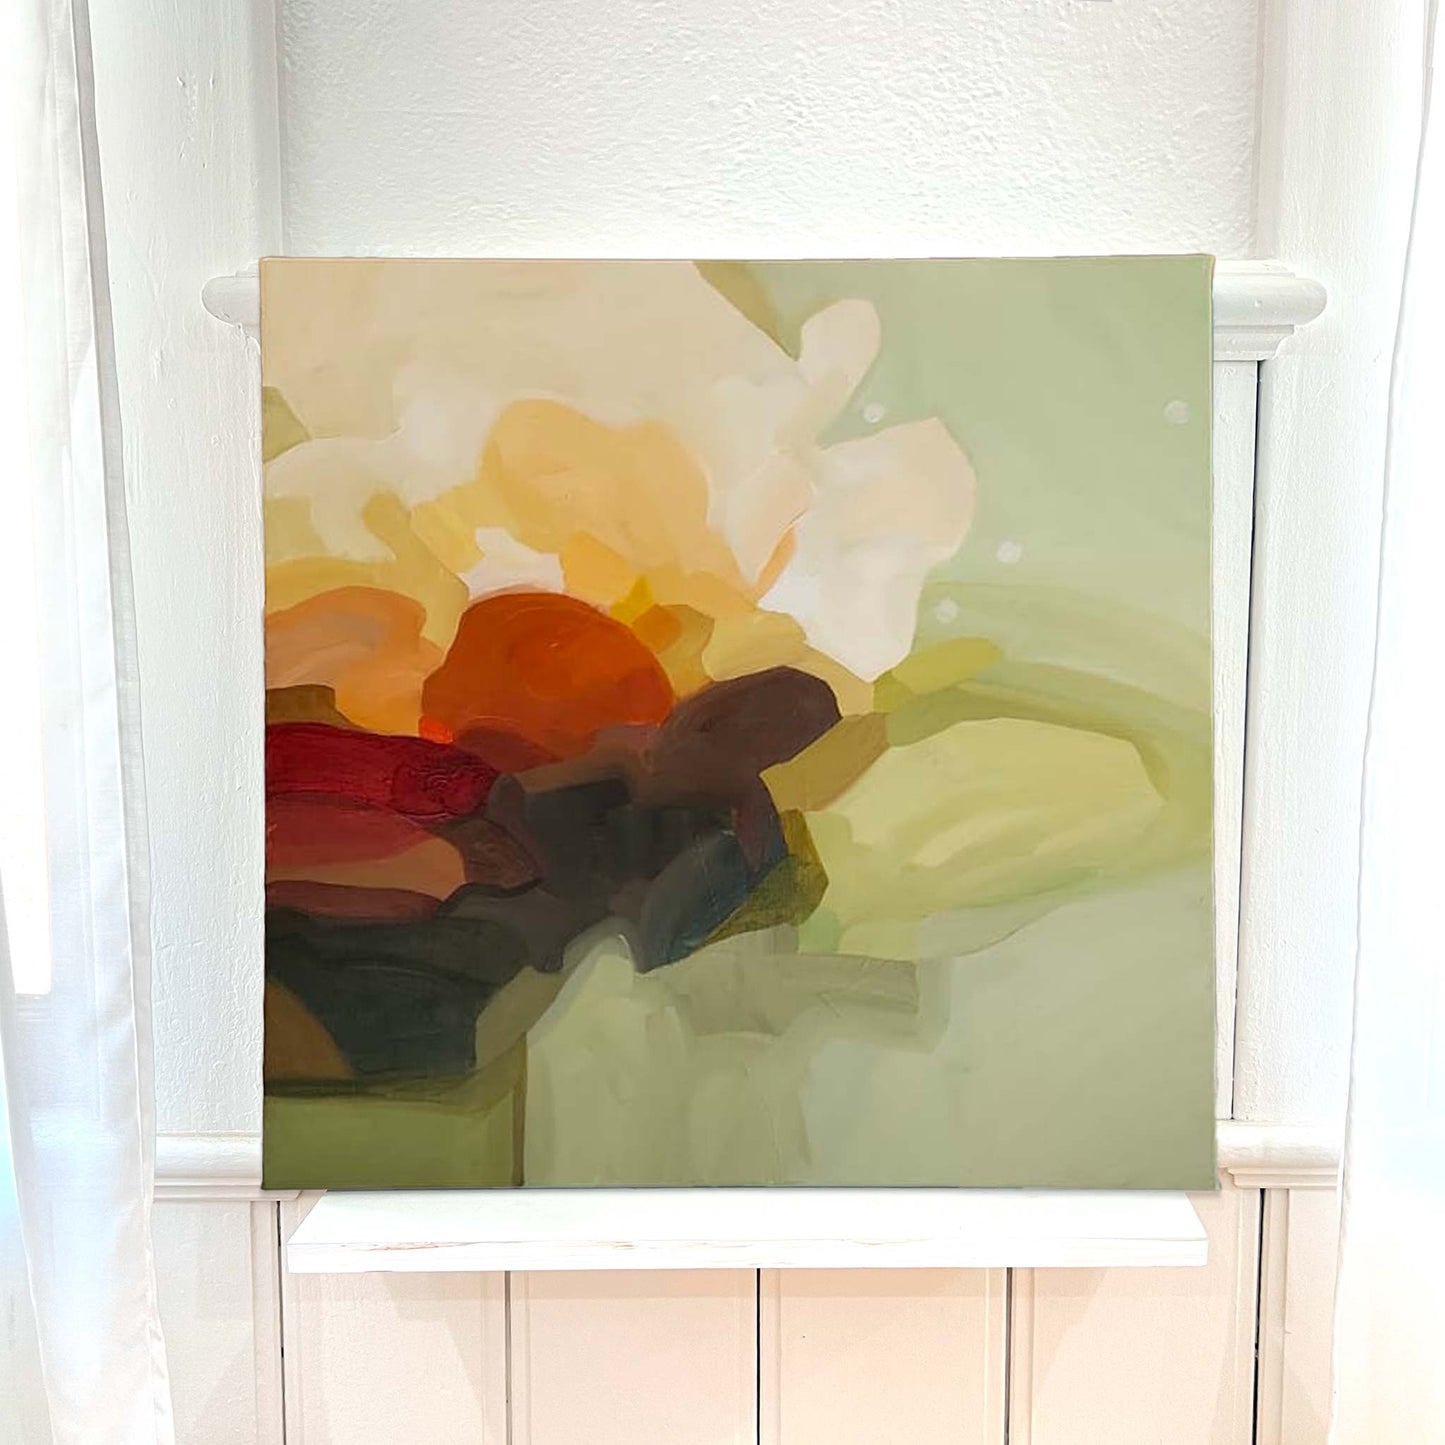 sage green and yellow abstract floral painting by Canadian artist Susannah Bleasby